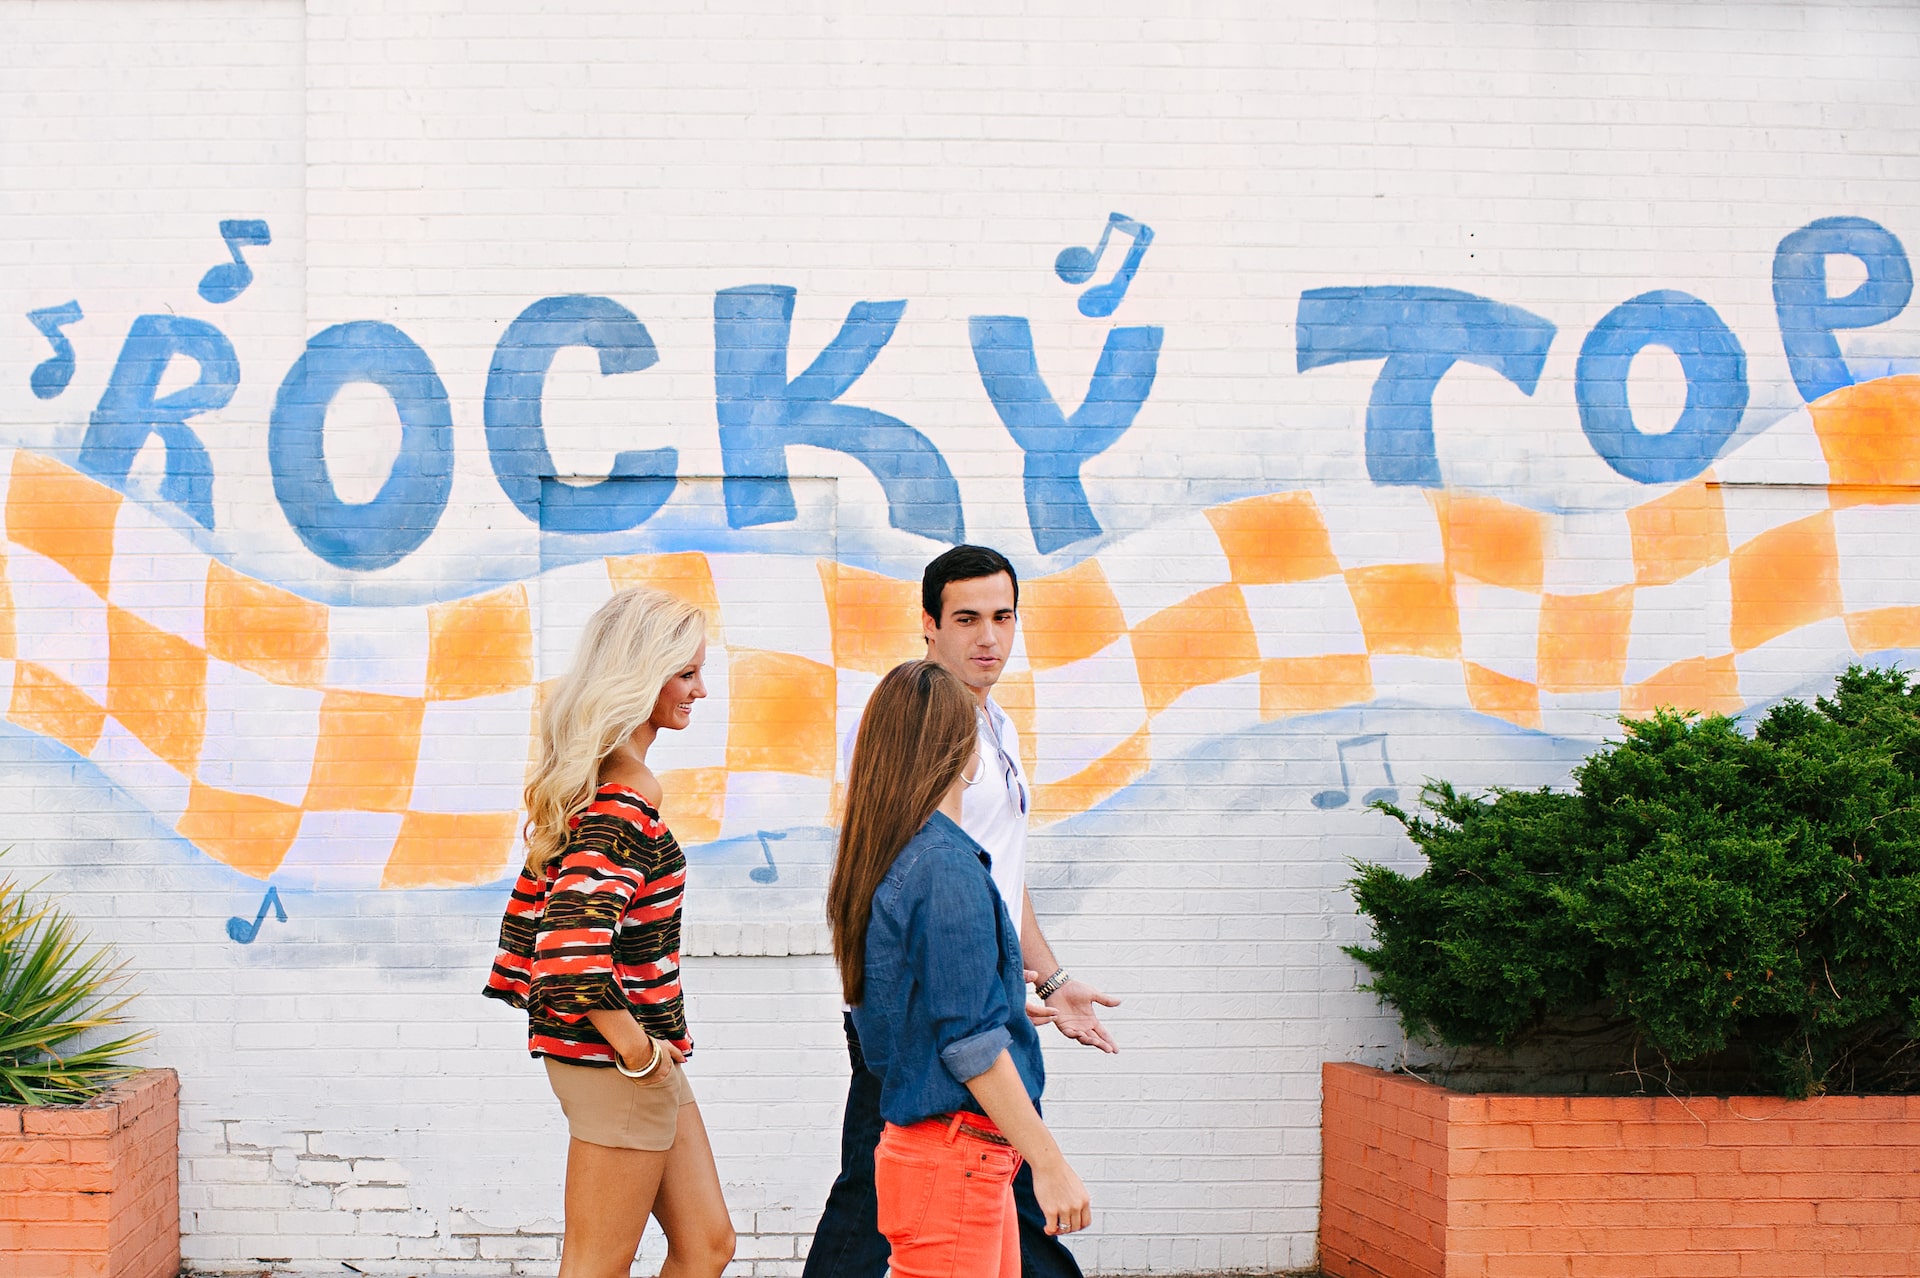 group of people walking in front of a mural that says "Rocky Top"